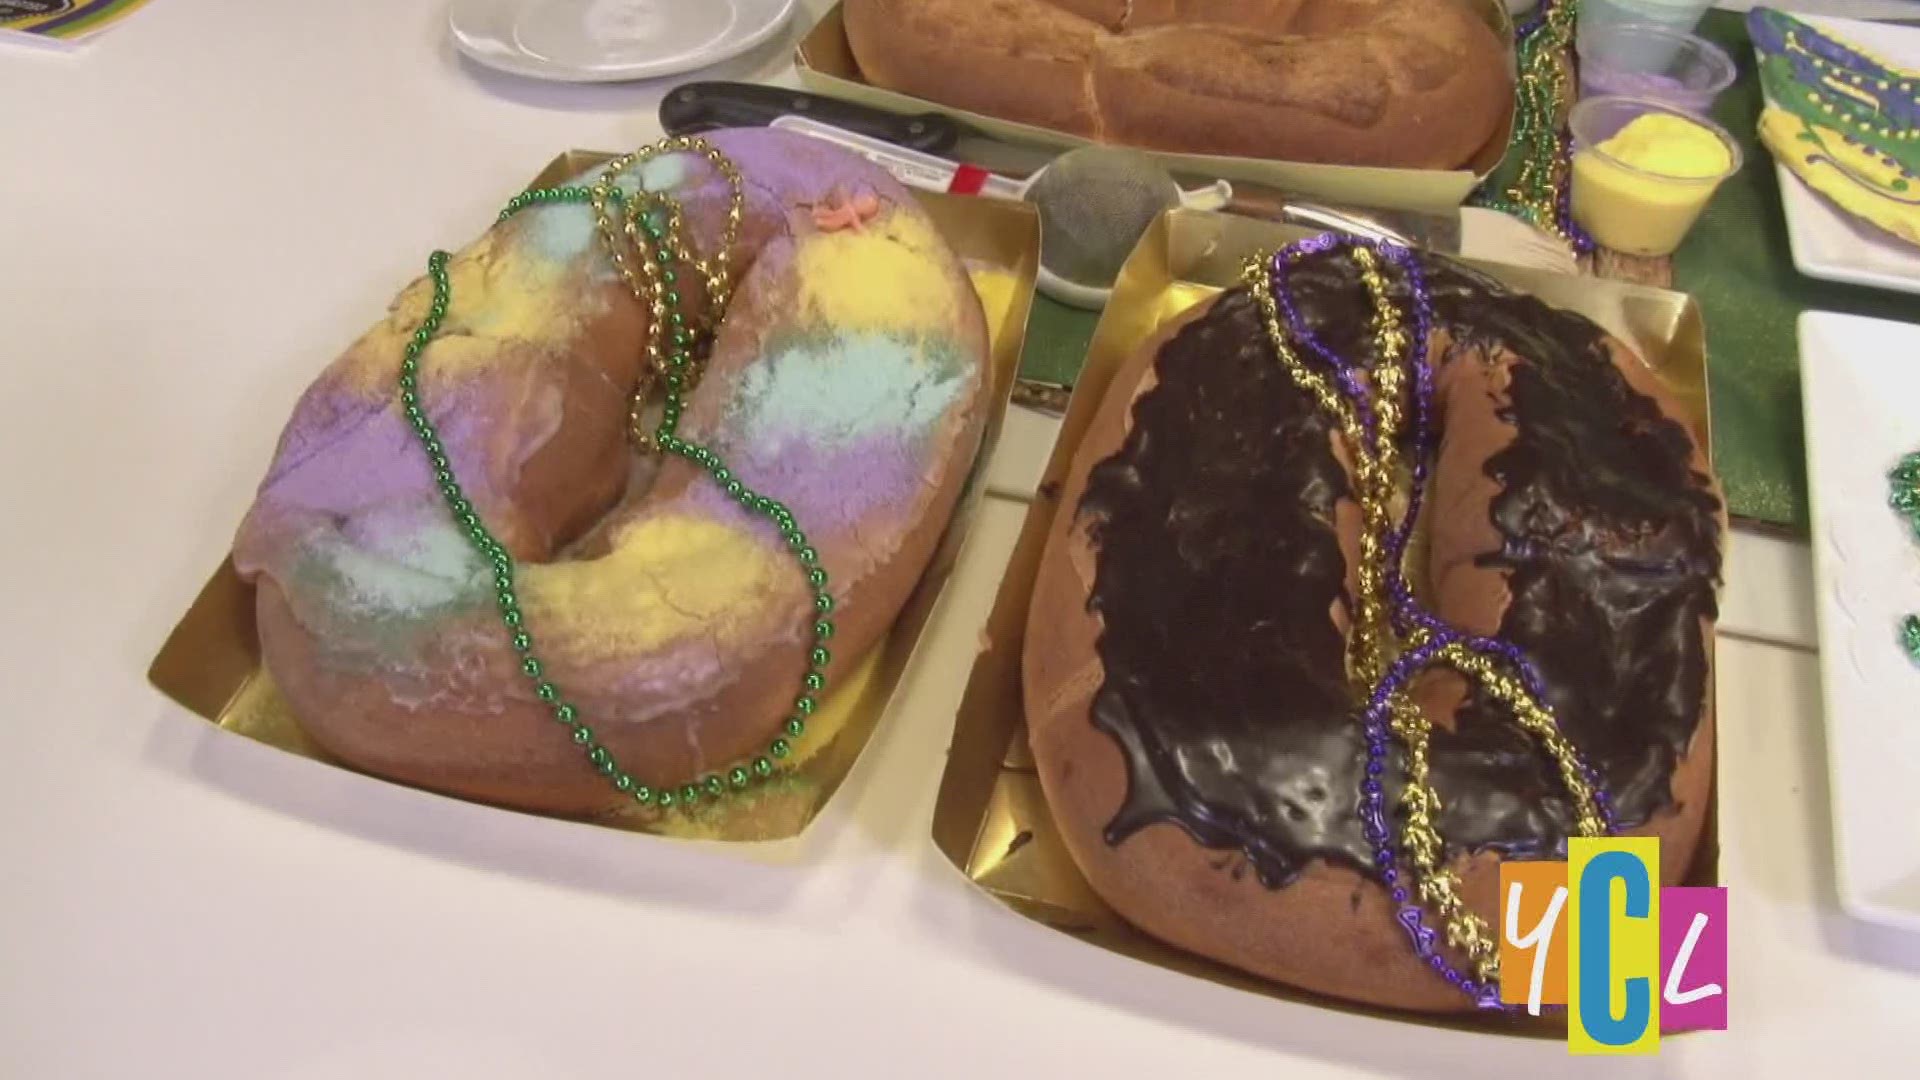 A frosted seasonal treat that Mardi Gras partygoers eat between January 6, otherwise known as King's Day or Twelfth Night, and Fat Tuesday.